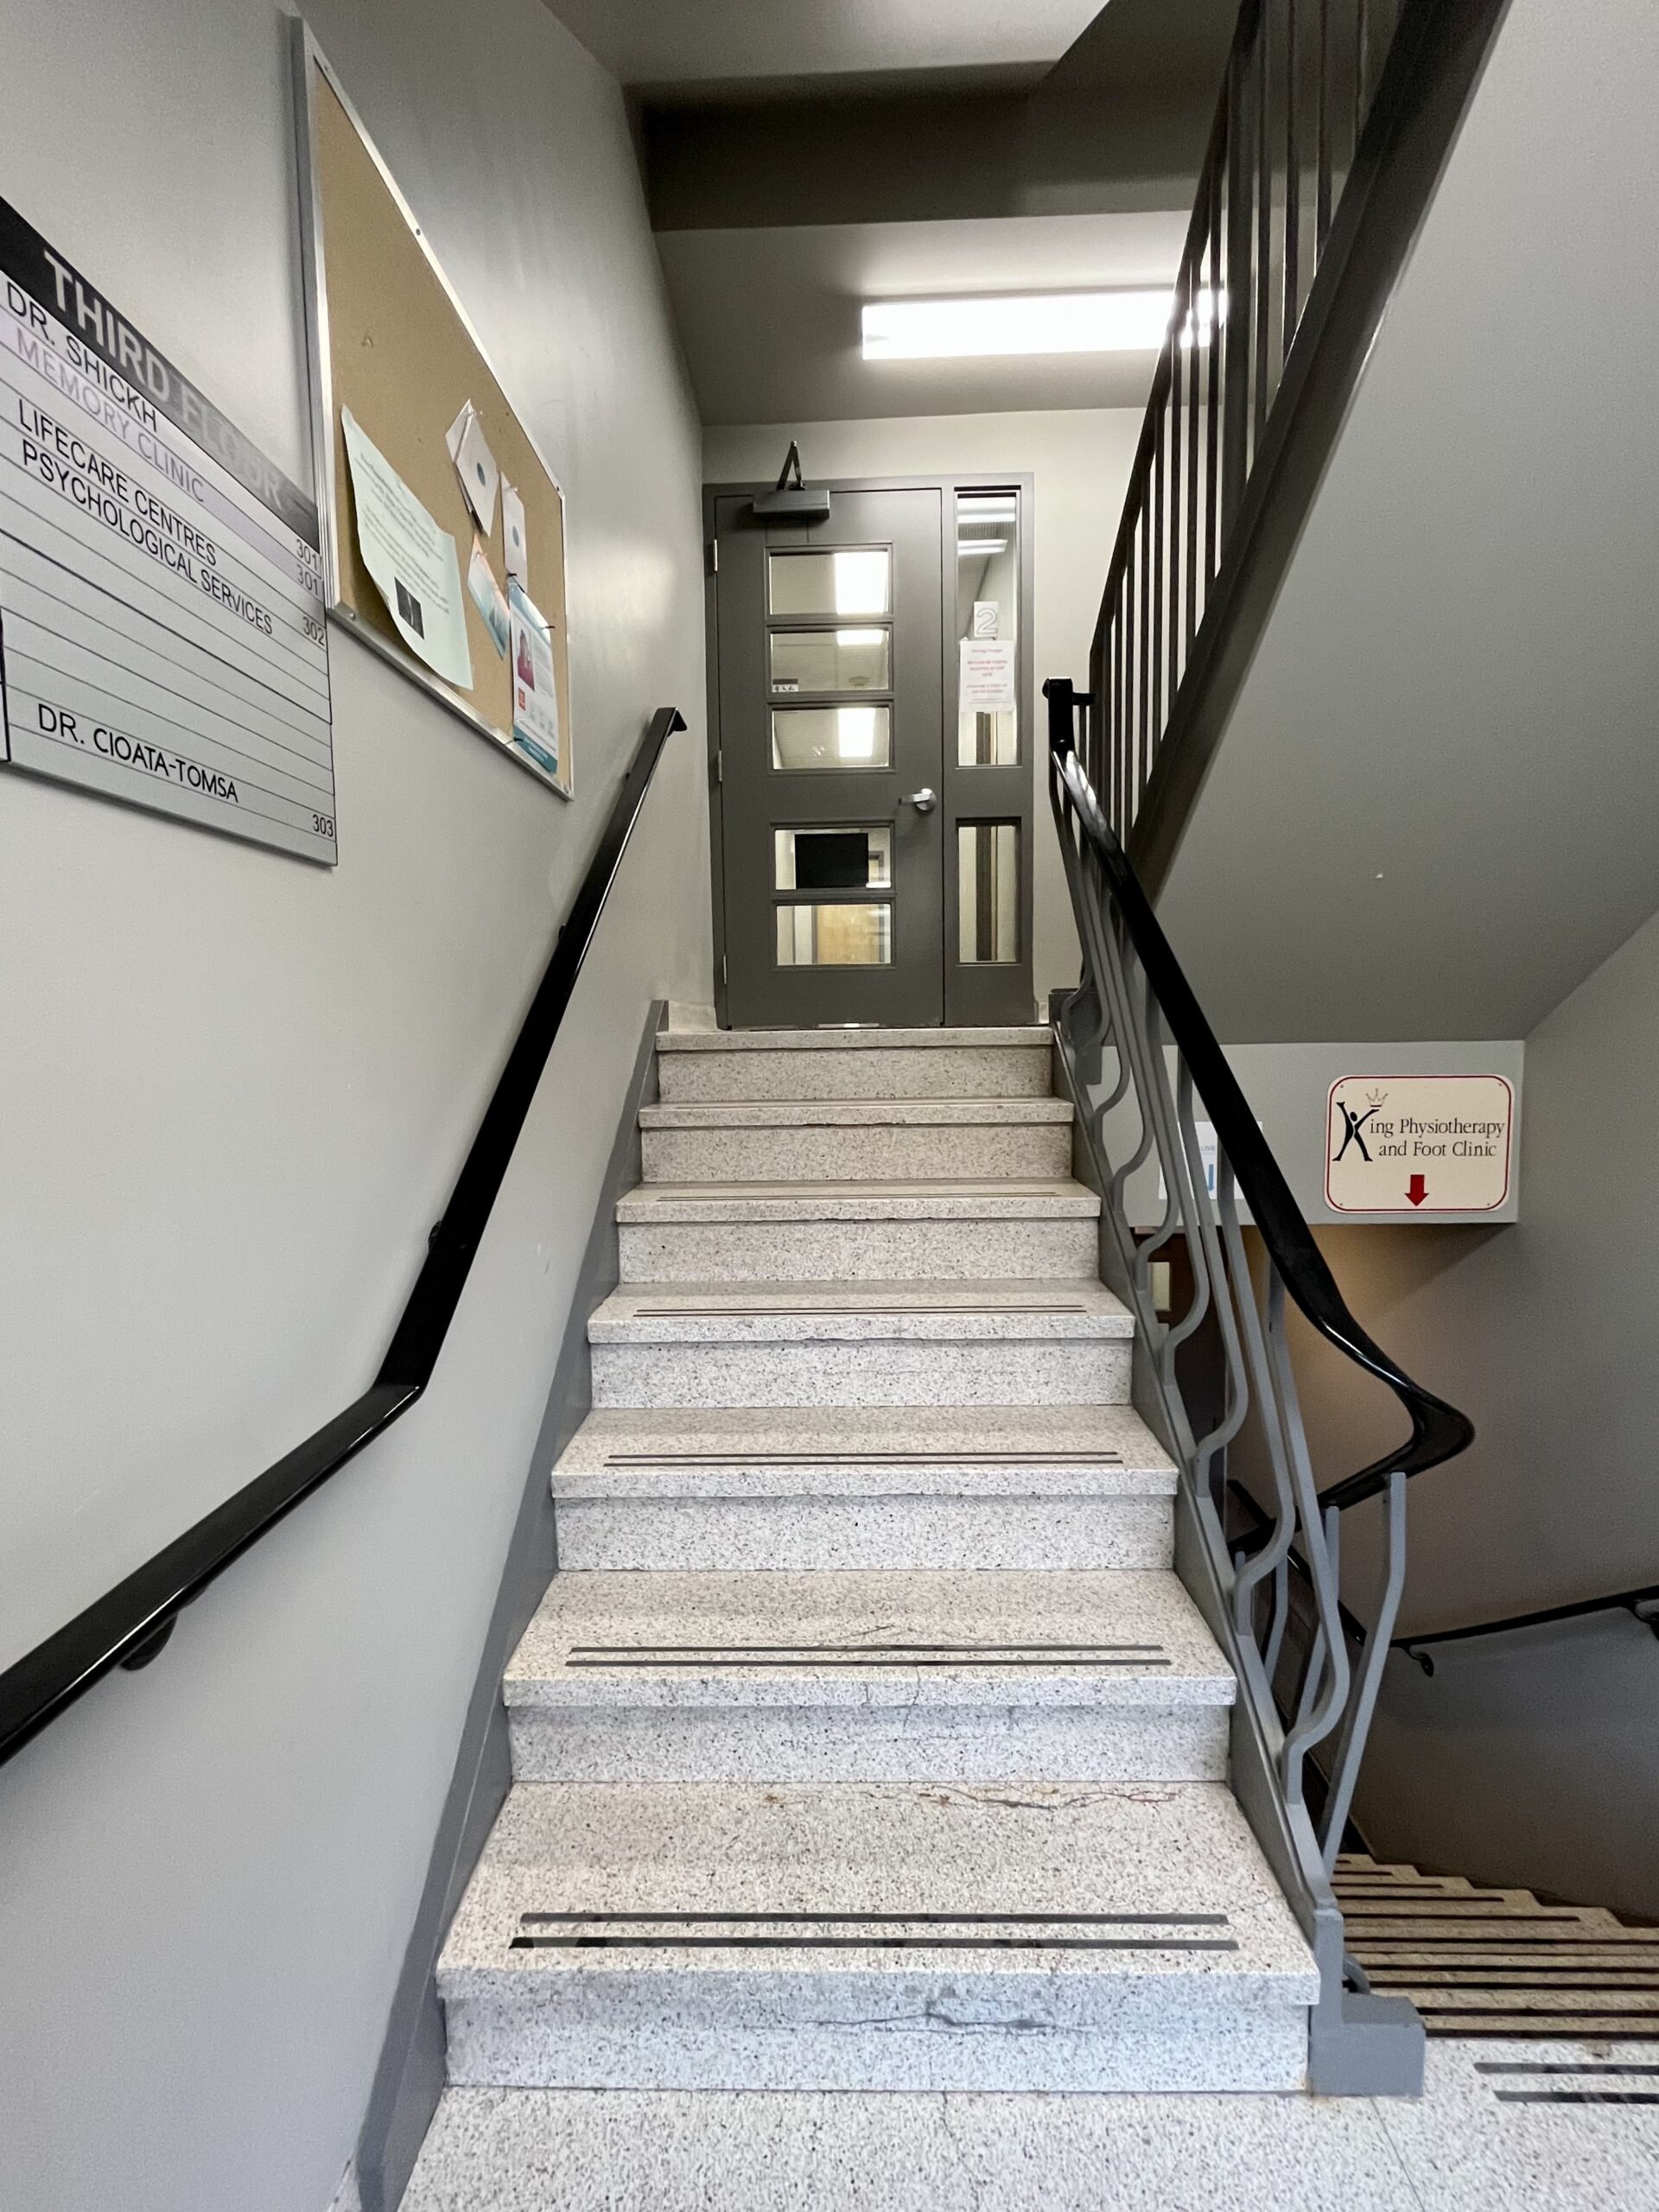 Staircase from the East Wing parking lot entrance of the Bowmanville Health Centre.